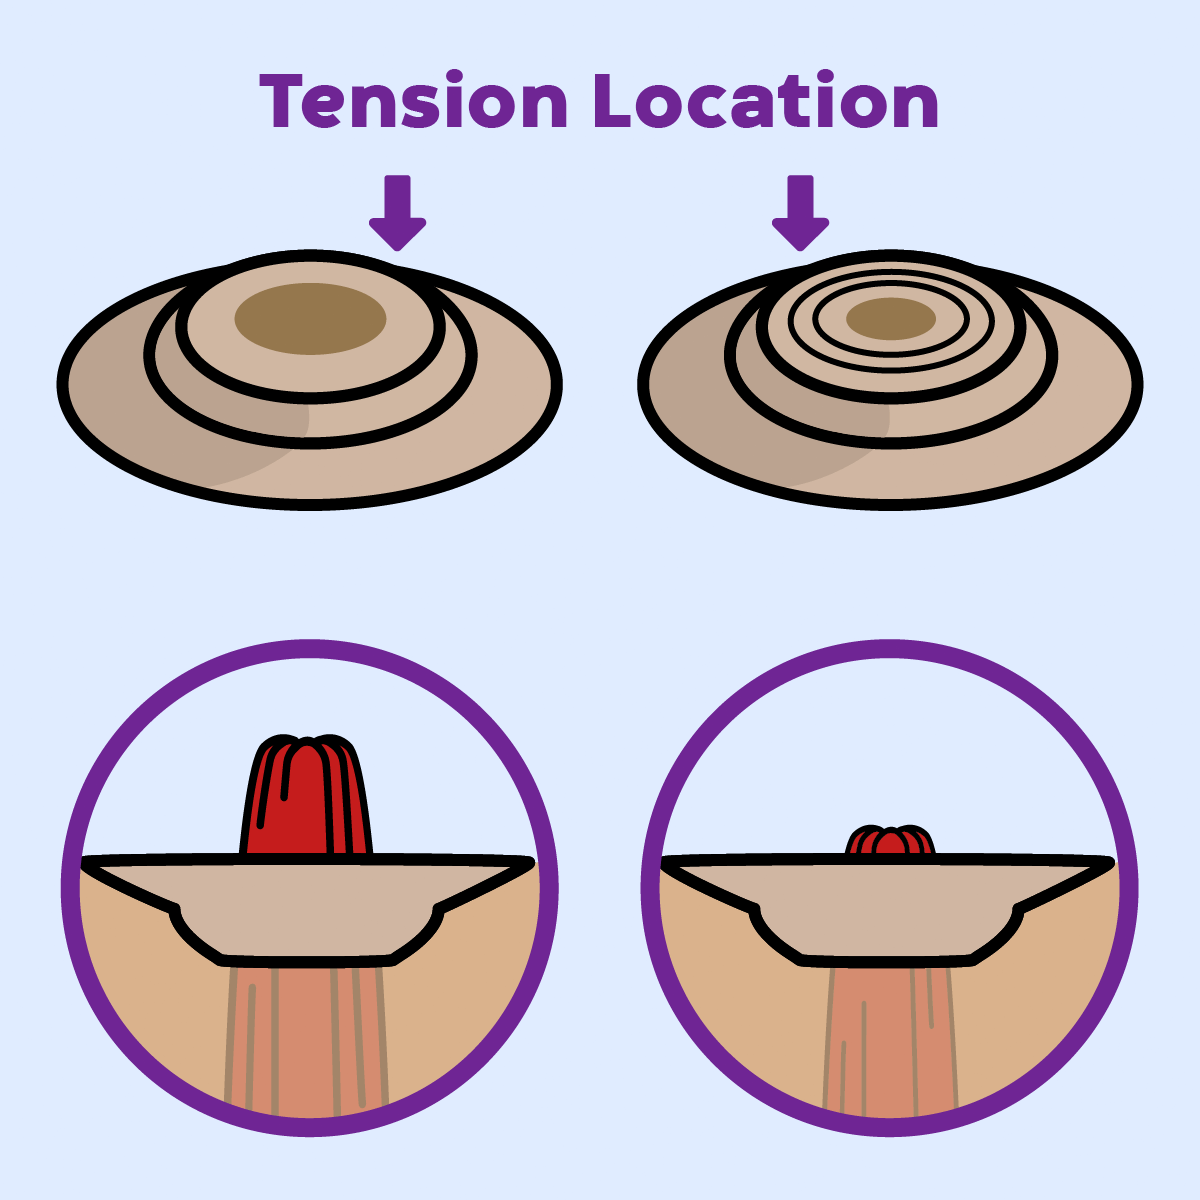 Animated GIF illustrating convexity tension on peristomal topography, exerted by the convex dome.